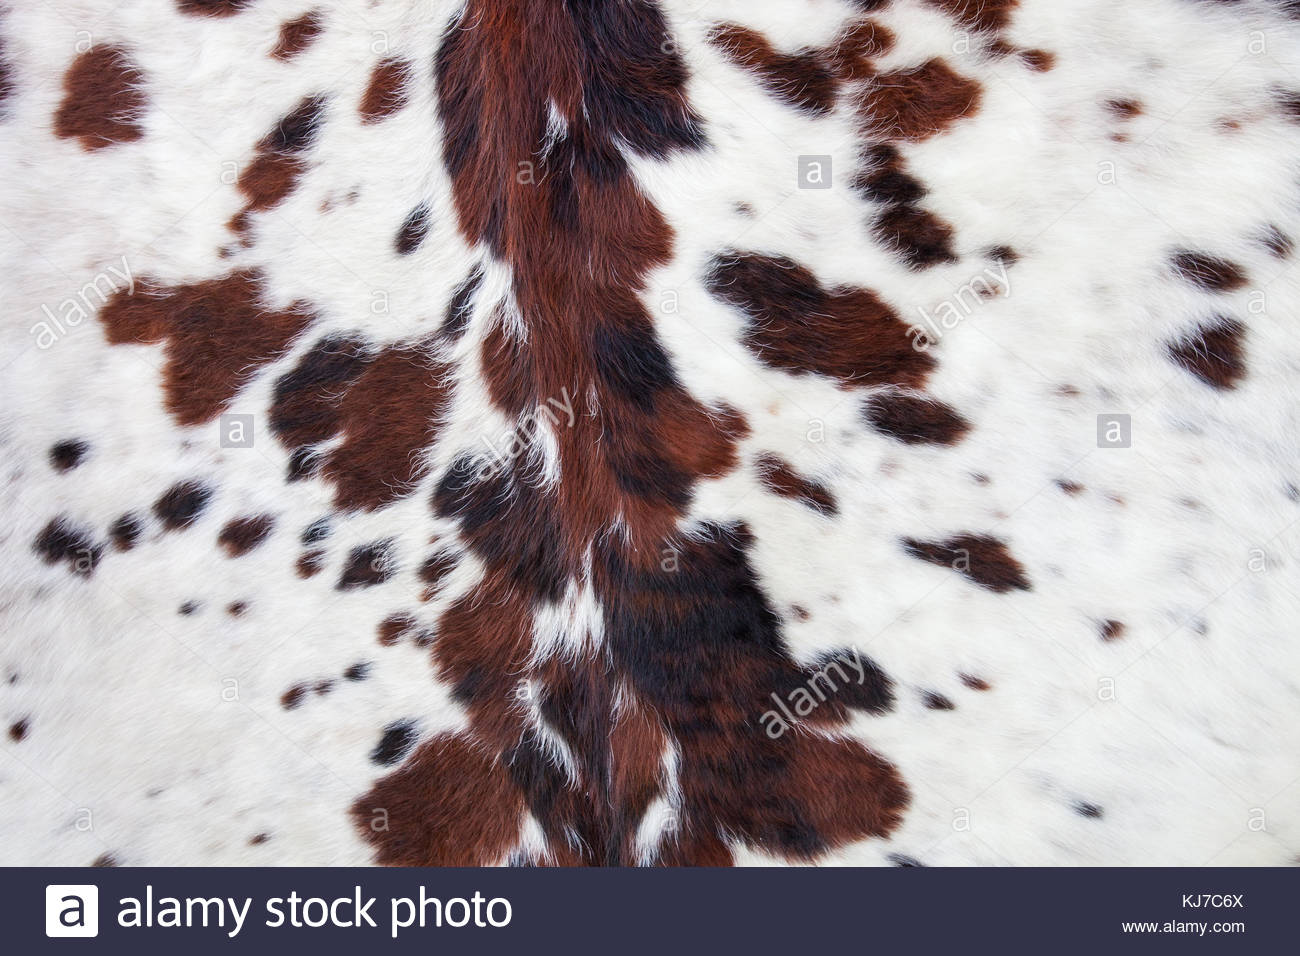 Longhorn White Cowhide With Black And Brown Spots Fur Background